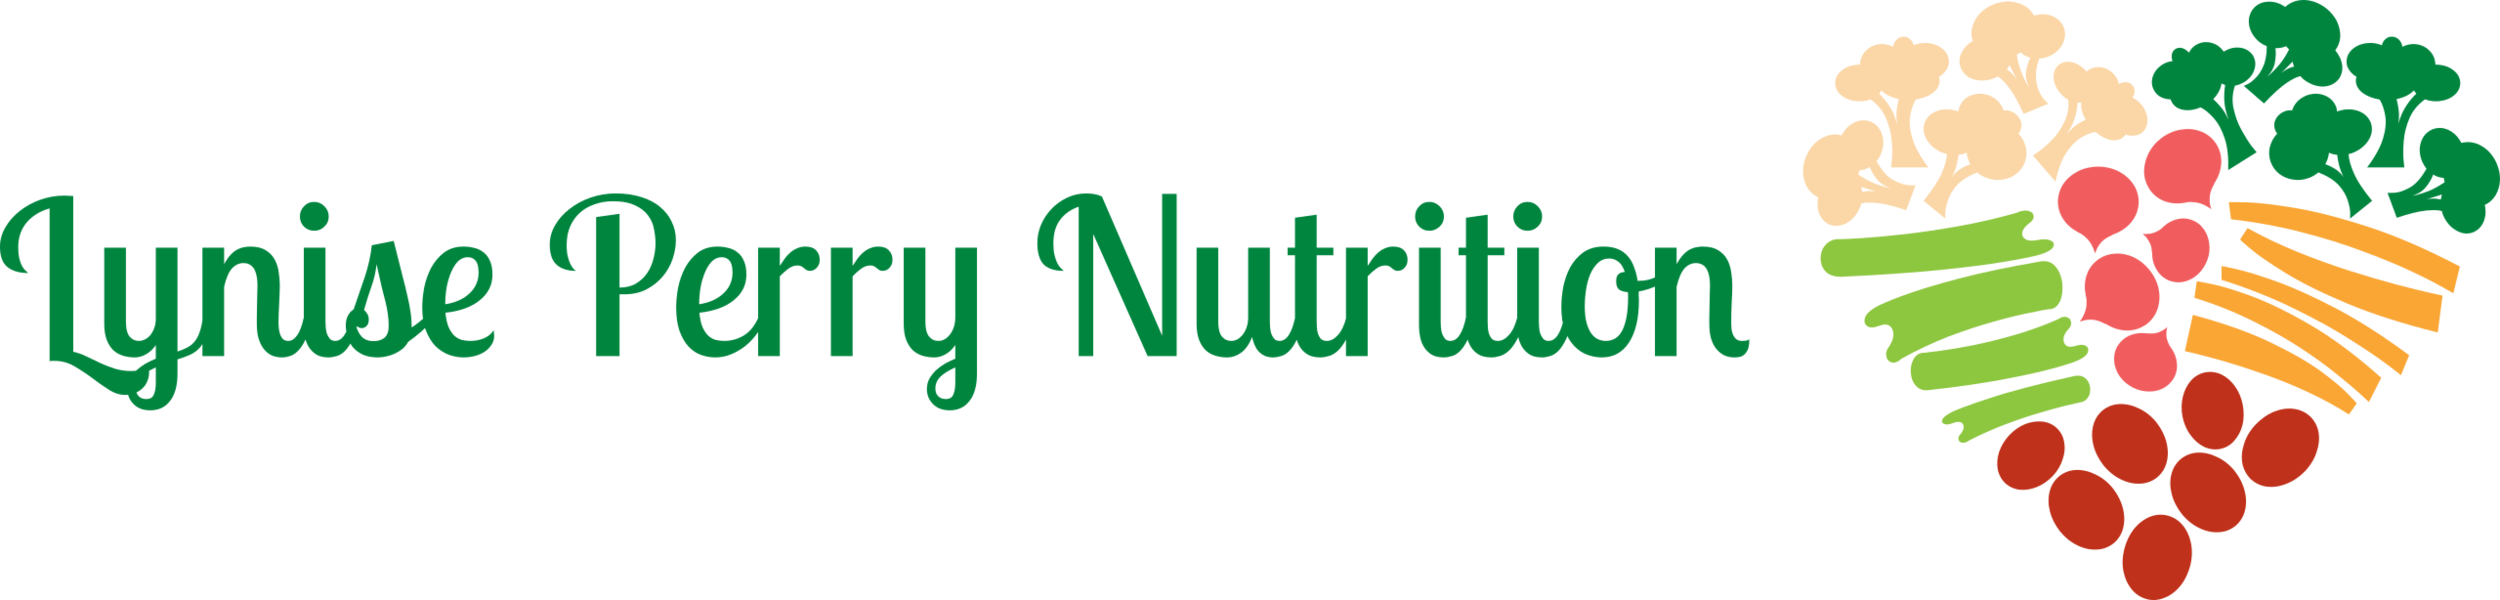 Lynise Perry Nutrition